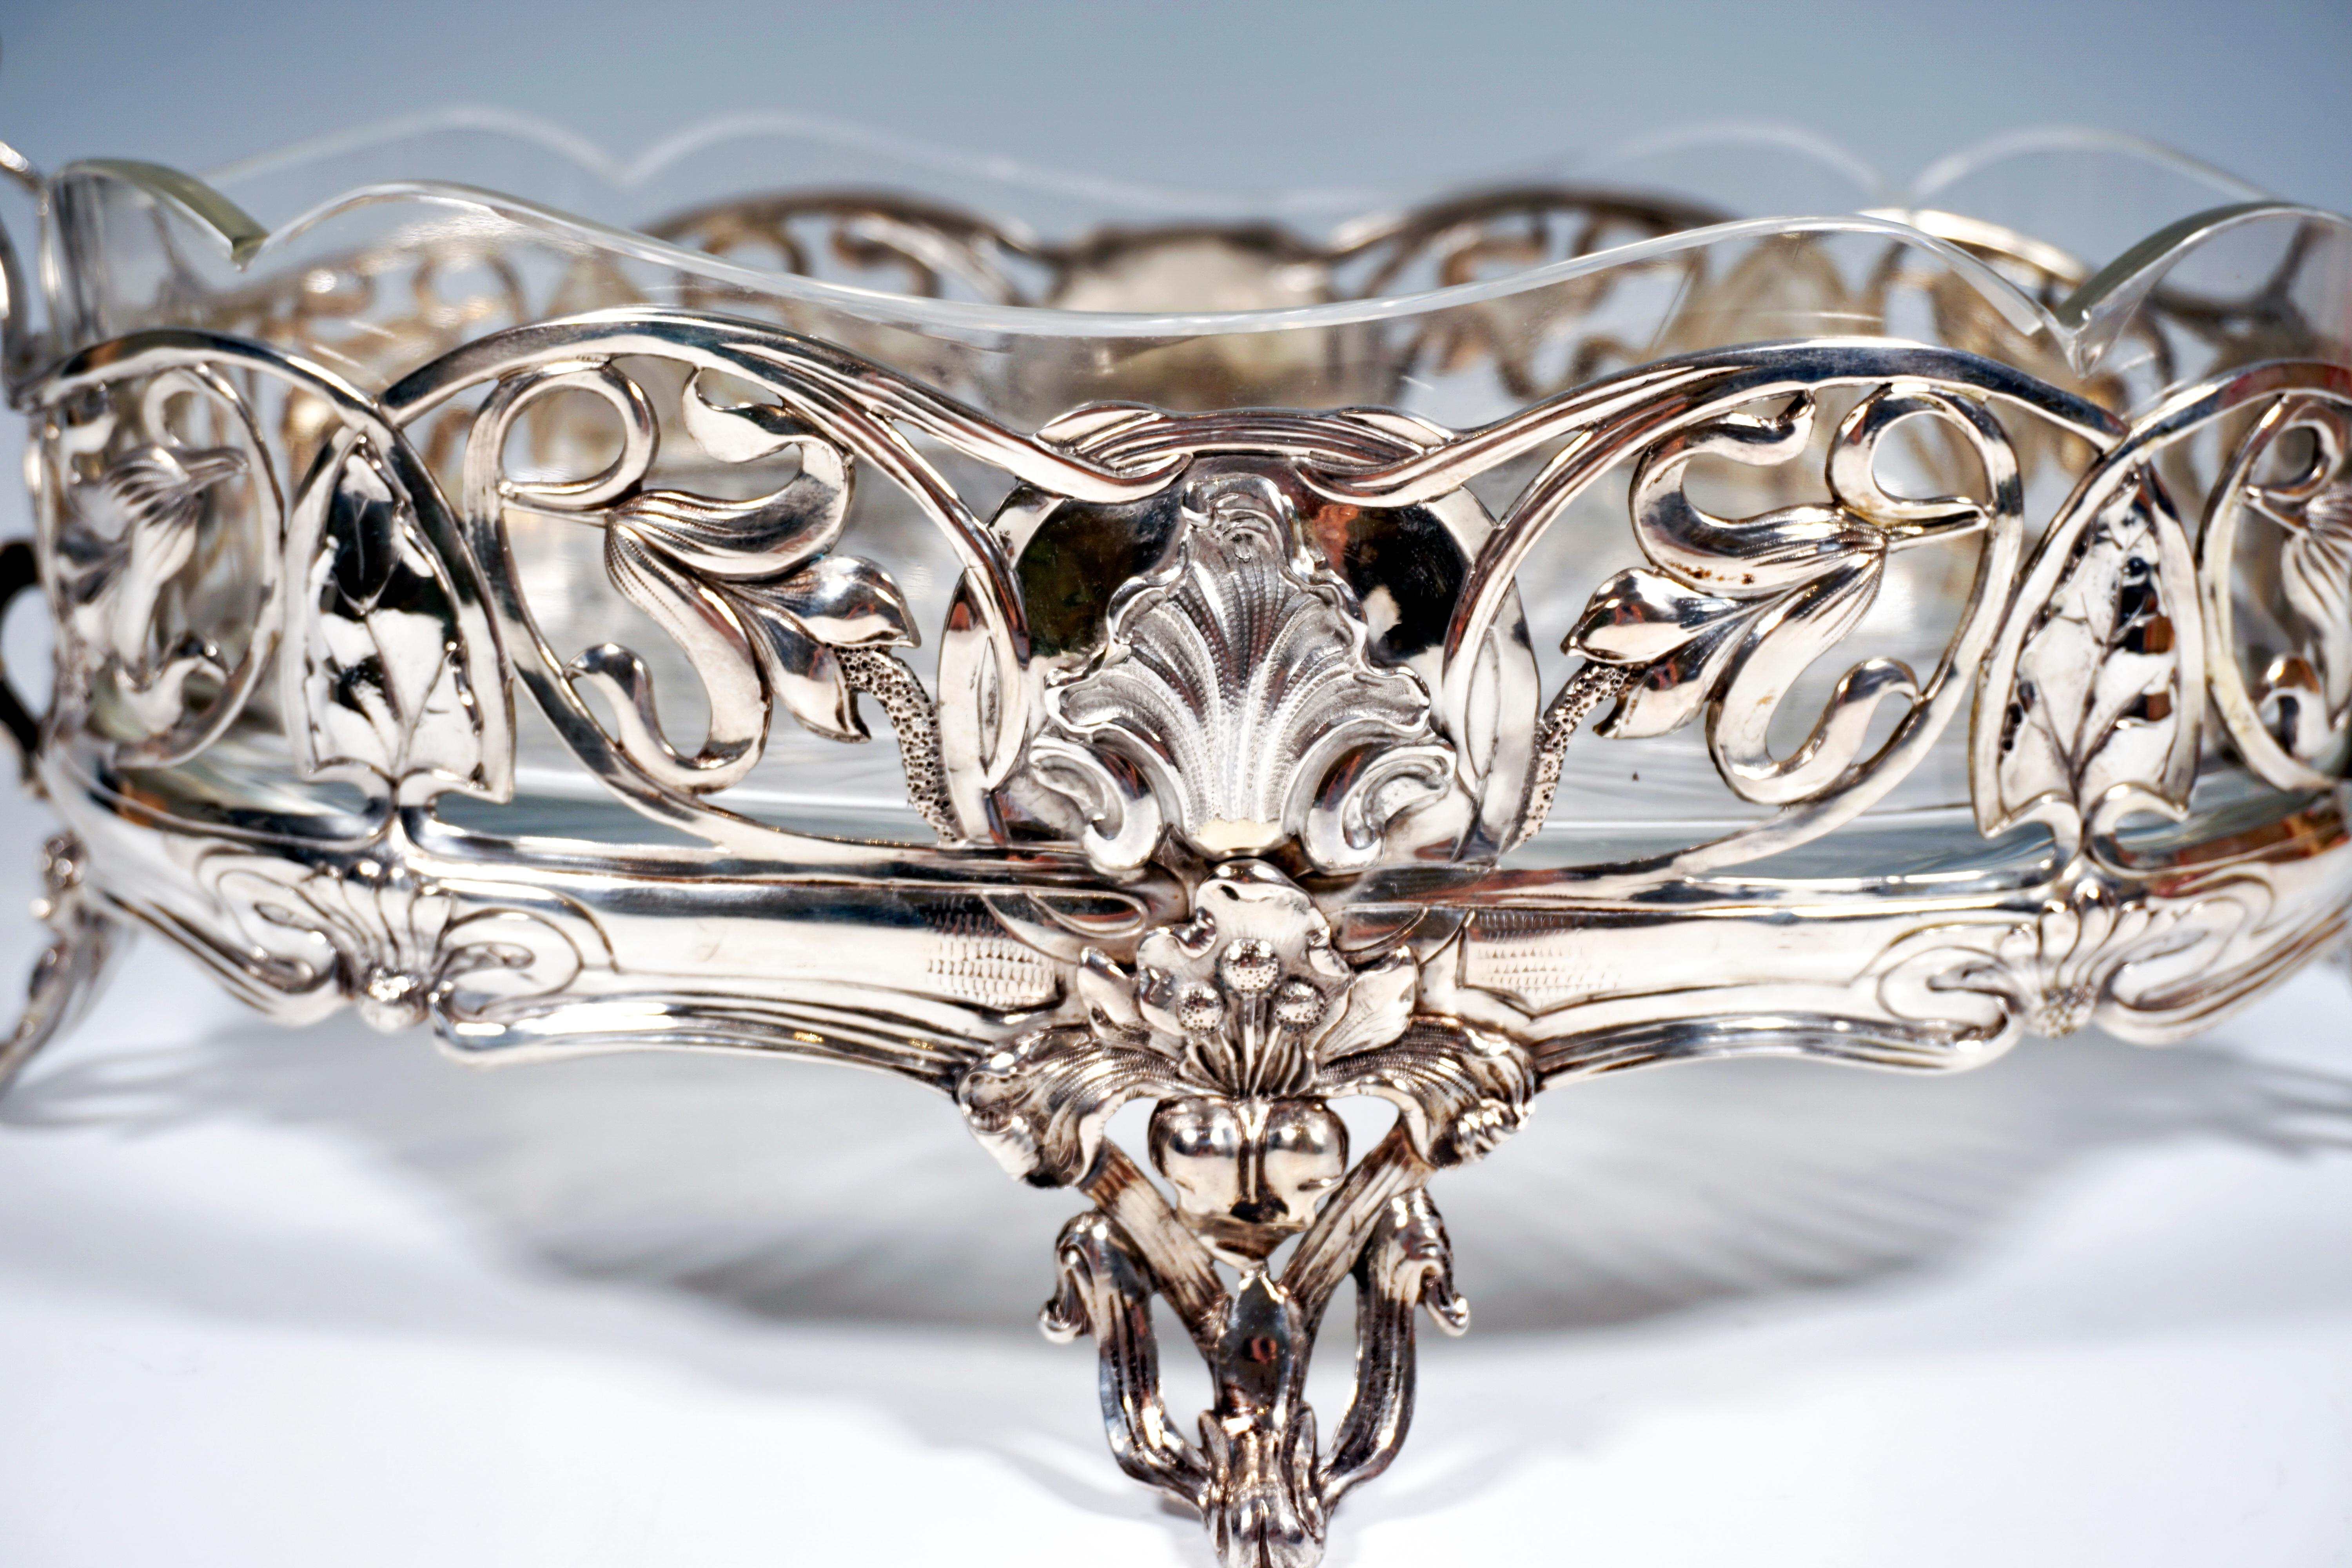 Early 20th Century Art Nouveau Silver Jardiniere with Original Glass Liner Viennese Master, ca 1900 For Sale